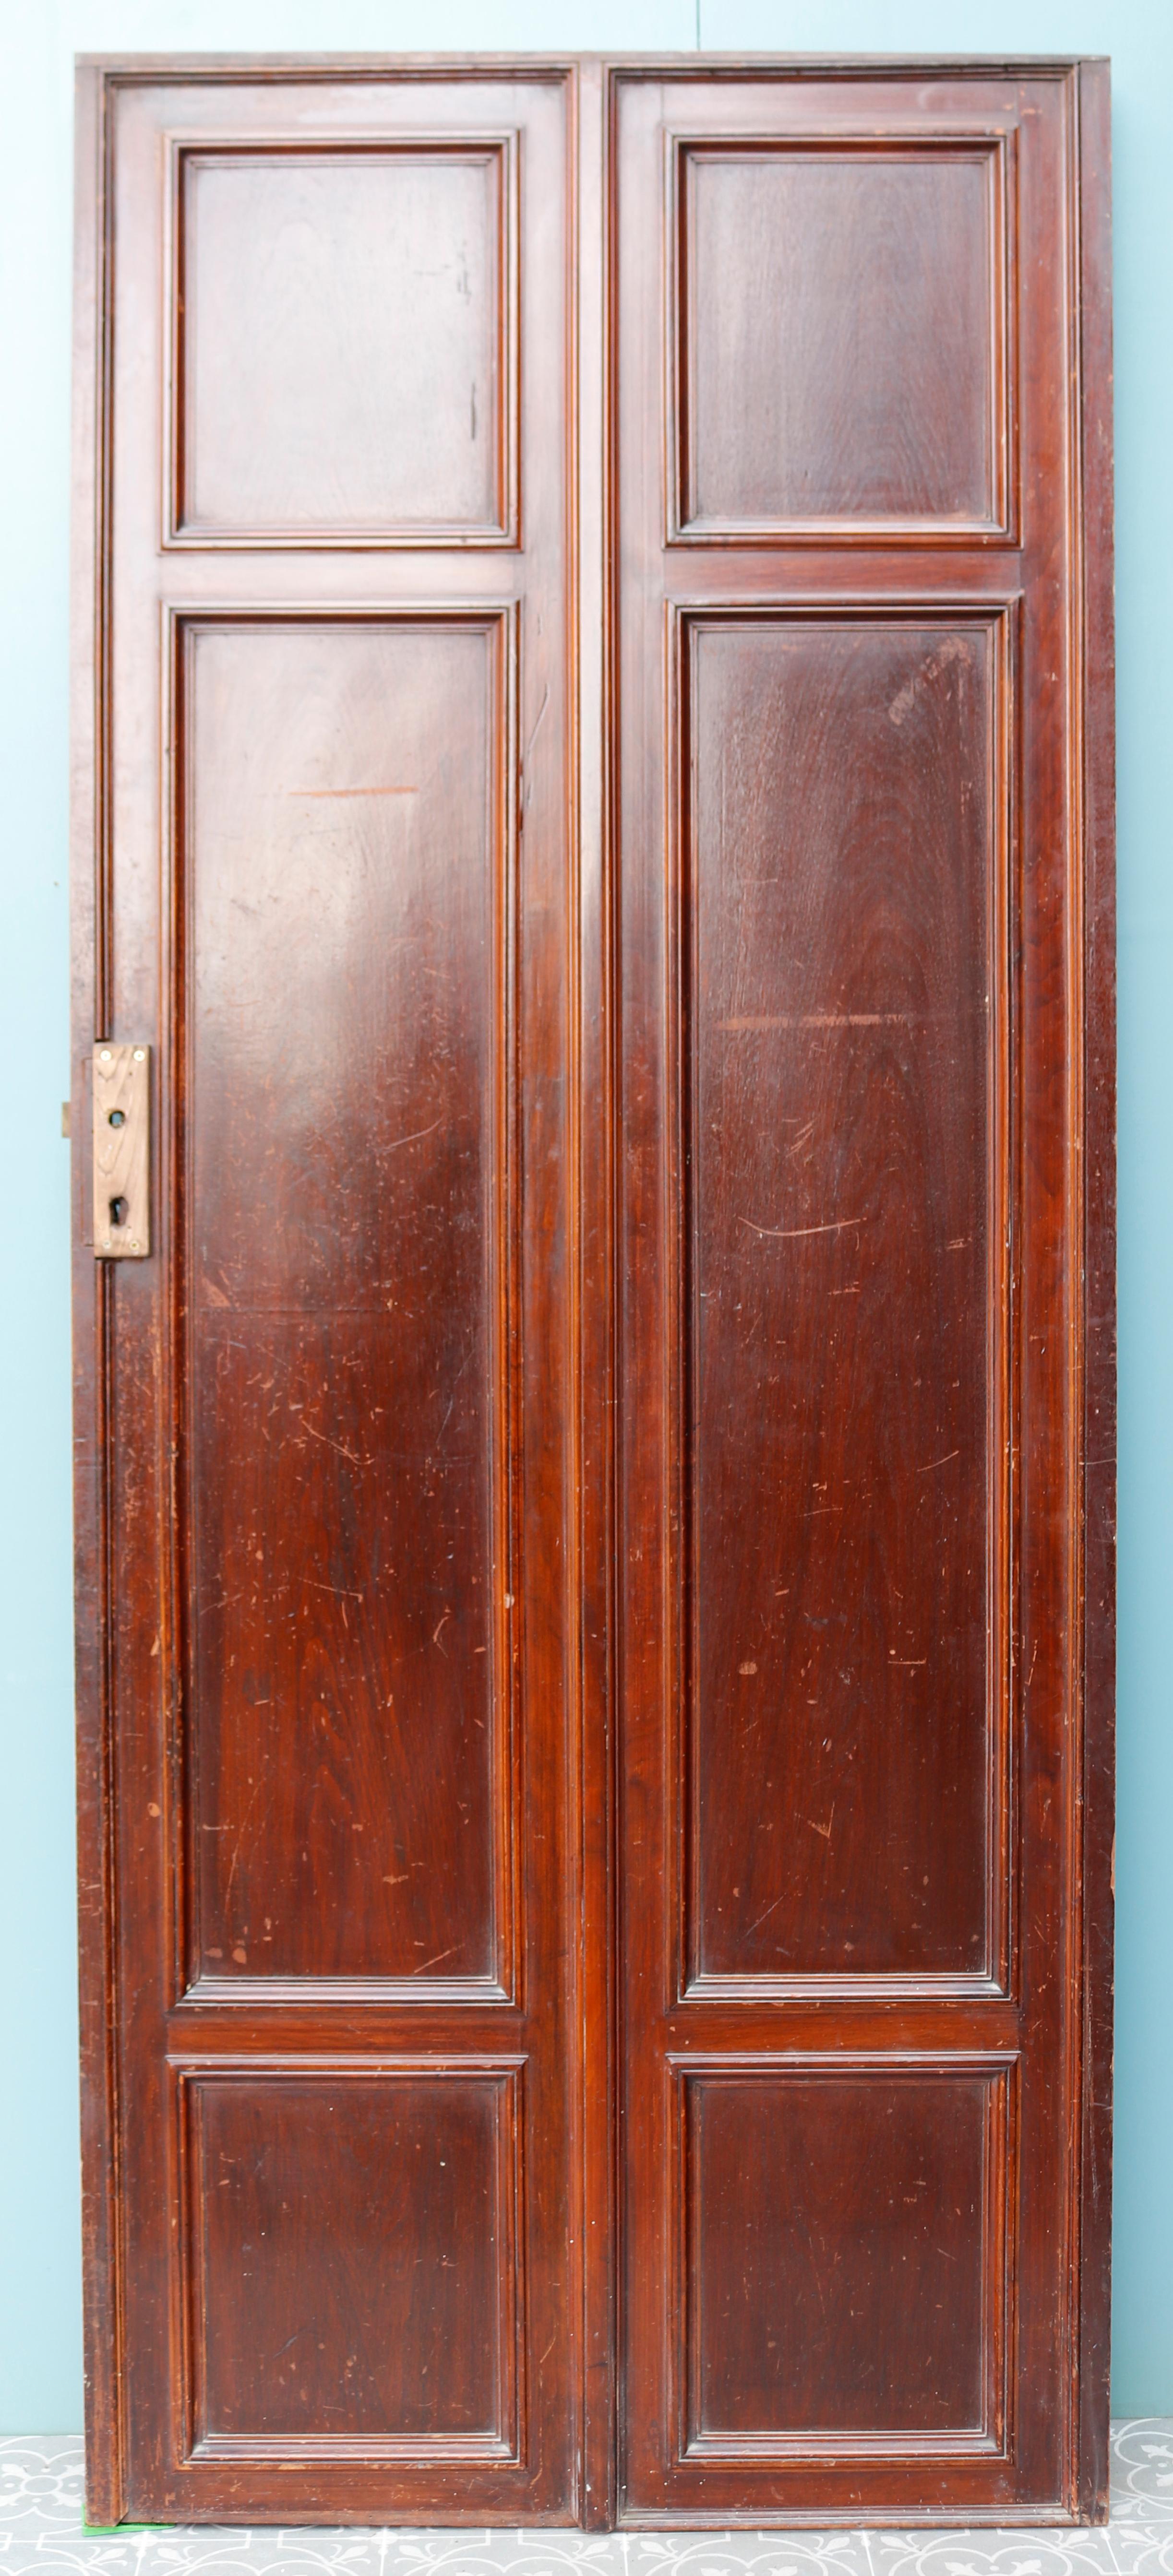 Antique carved walnut door. This French, early 20th century door includes carved leaf patterns in a grand design on all six panels. A very decorative interior door in Louis XVI style. If you need help choosing your antique door, please take a look